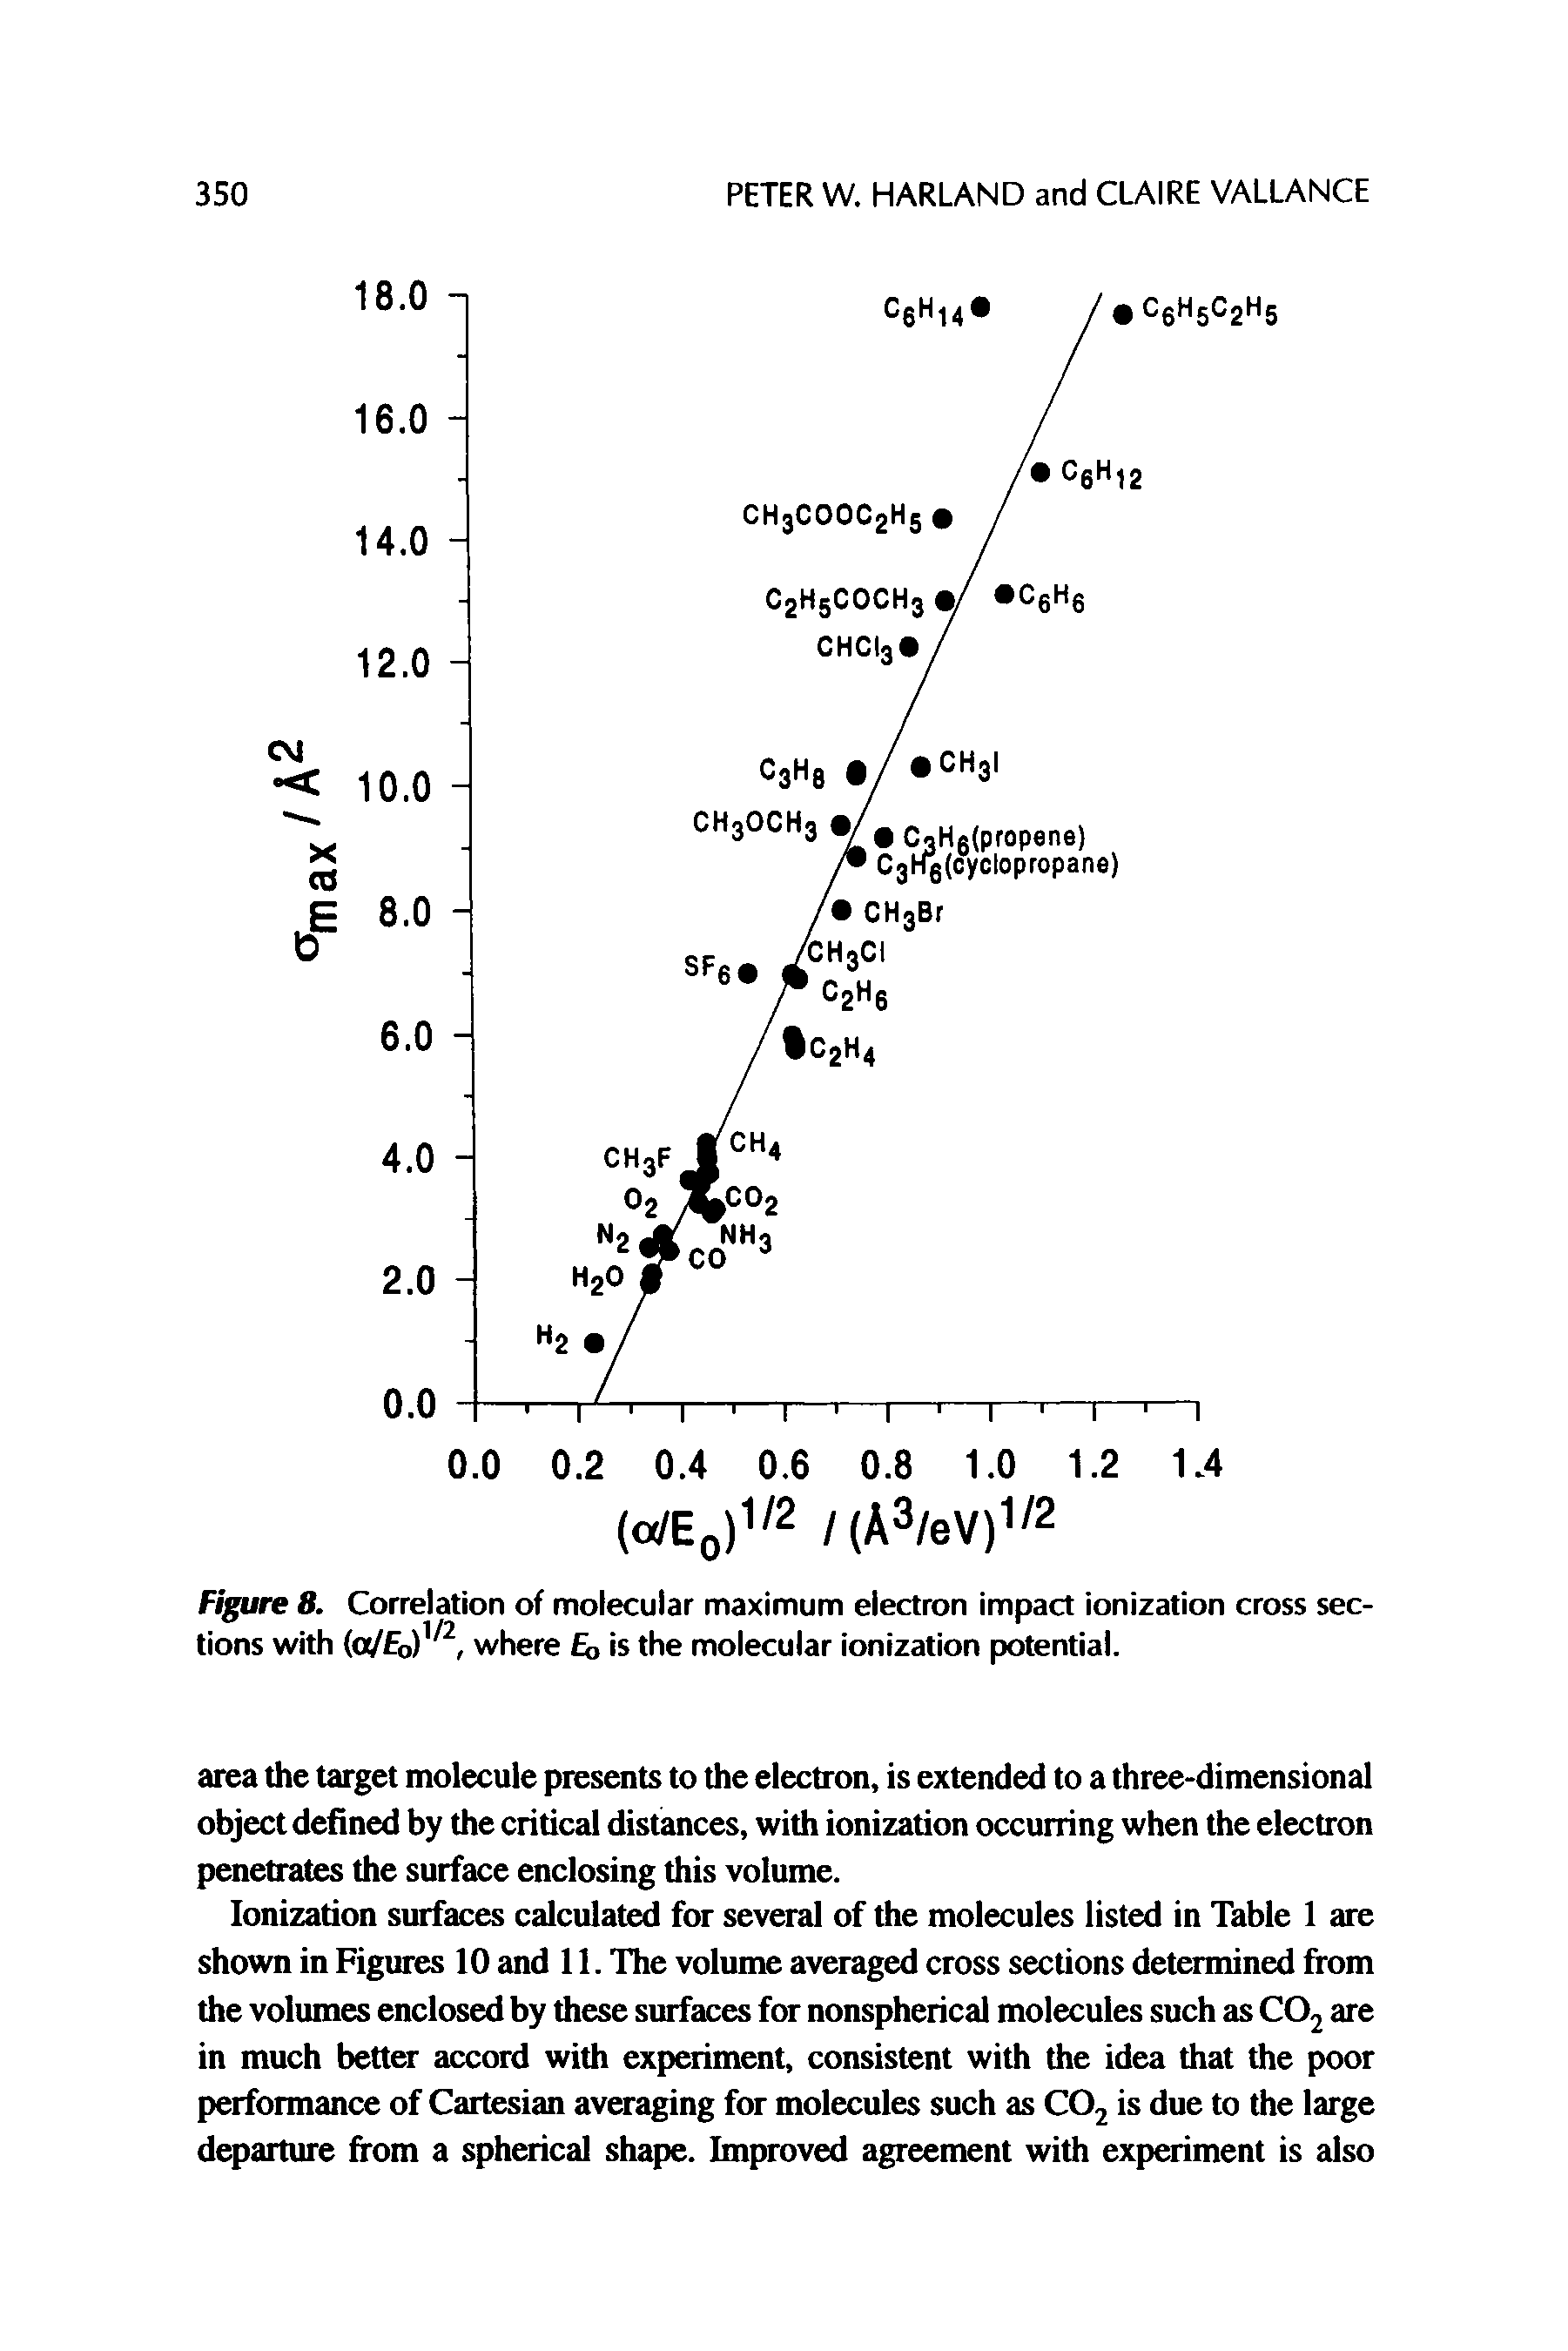 Figure 8. Correlation of molecular maximum electron impact ionization cross sections with (a/Fo) 2, where Eo is the molecular ionization potential.